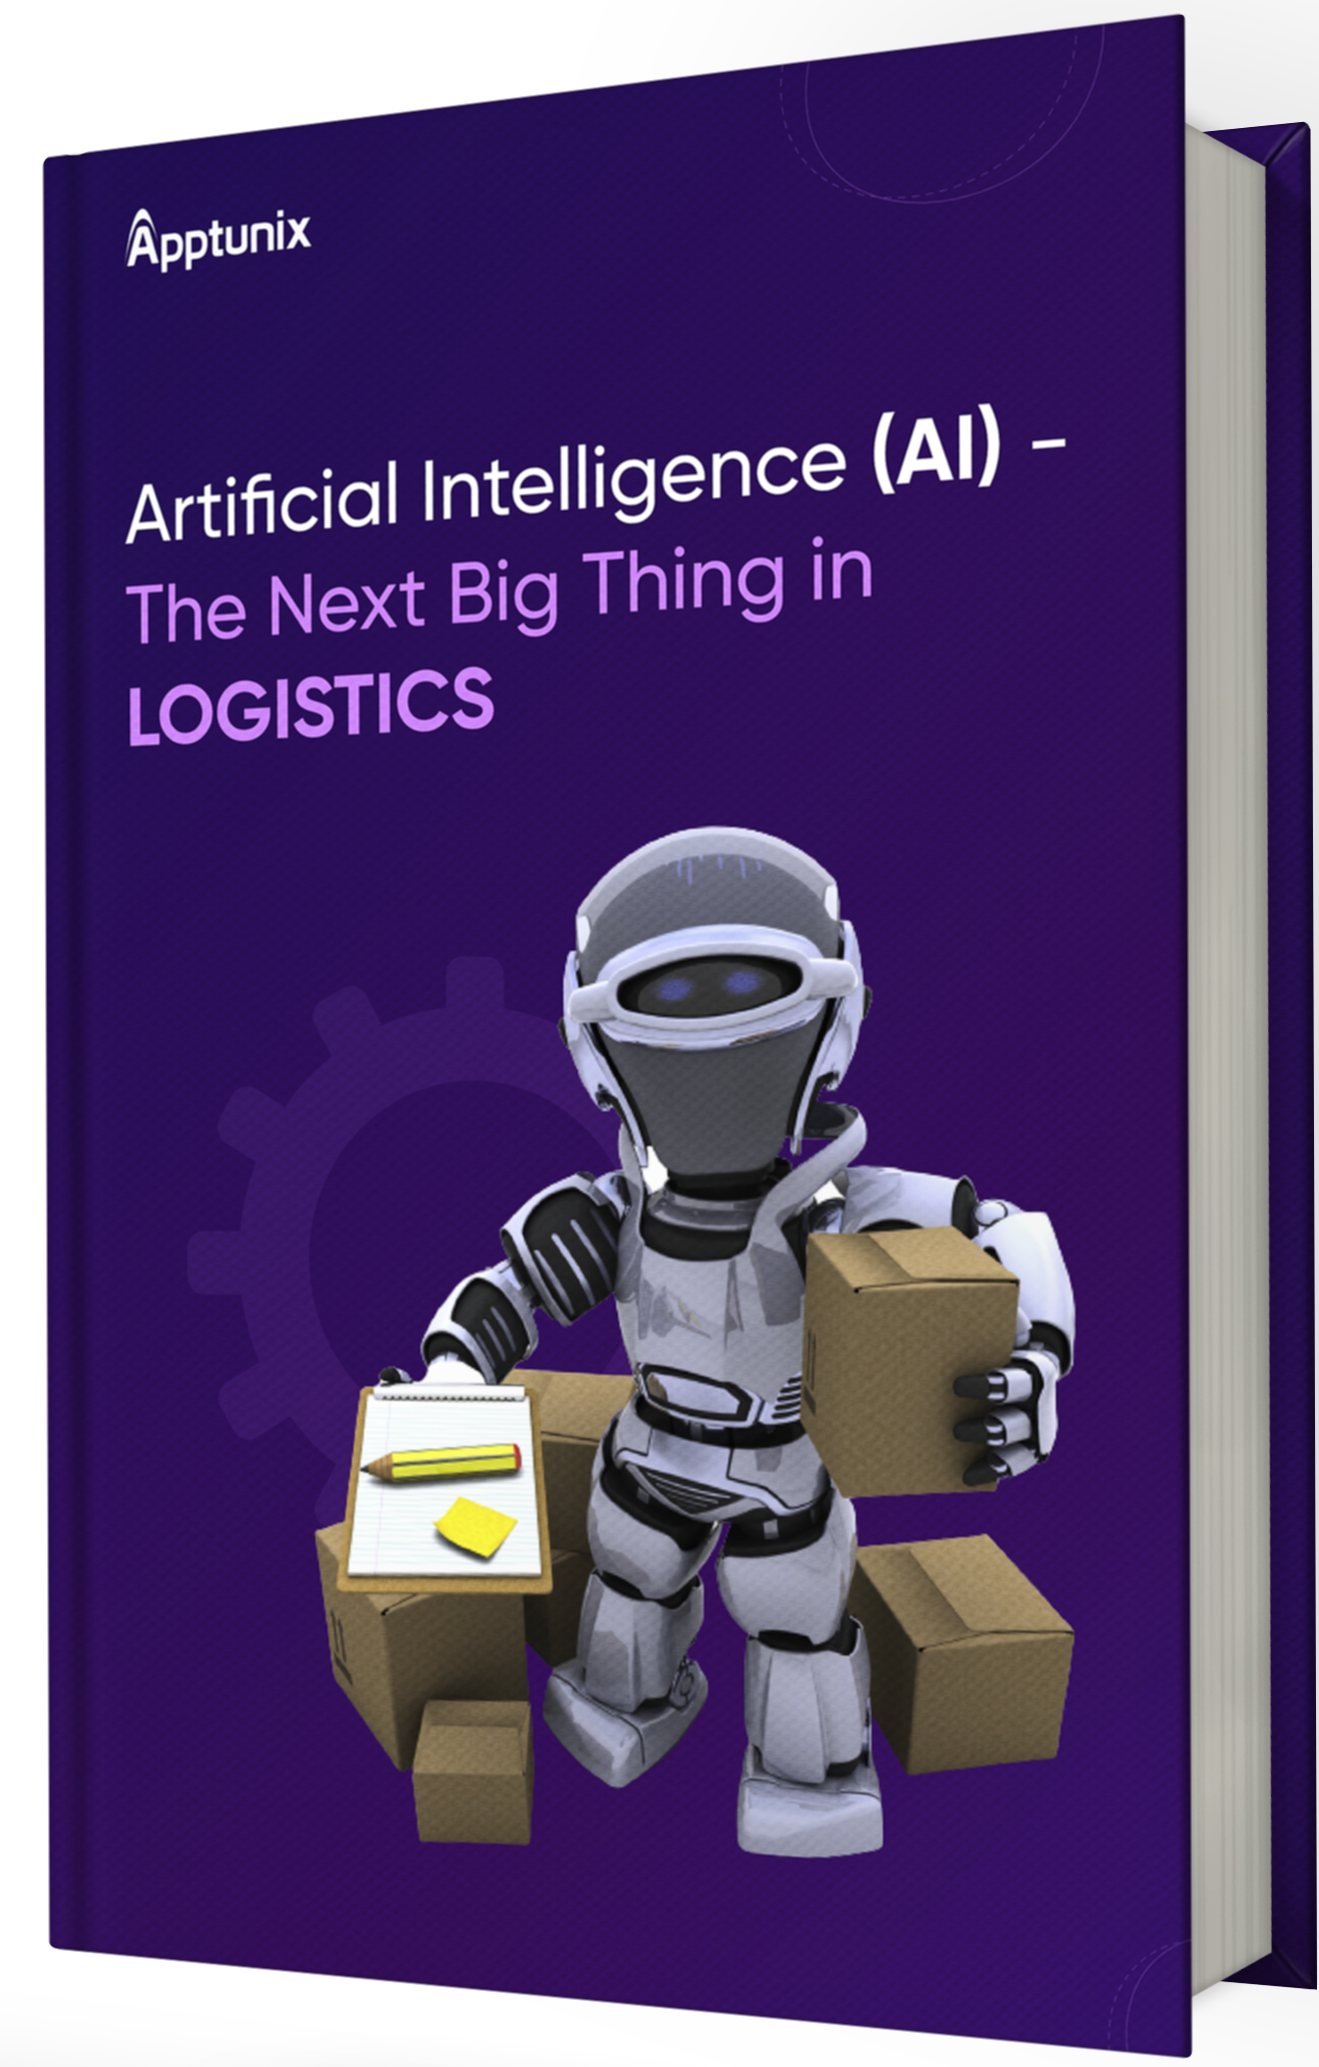 Artificial Intelligence (AI) - The Next Big Thing in Logistics